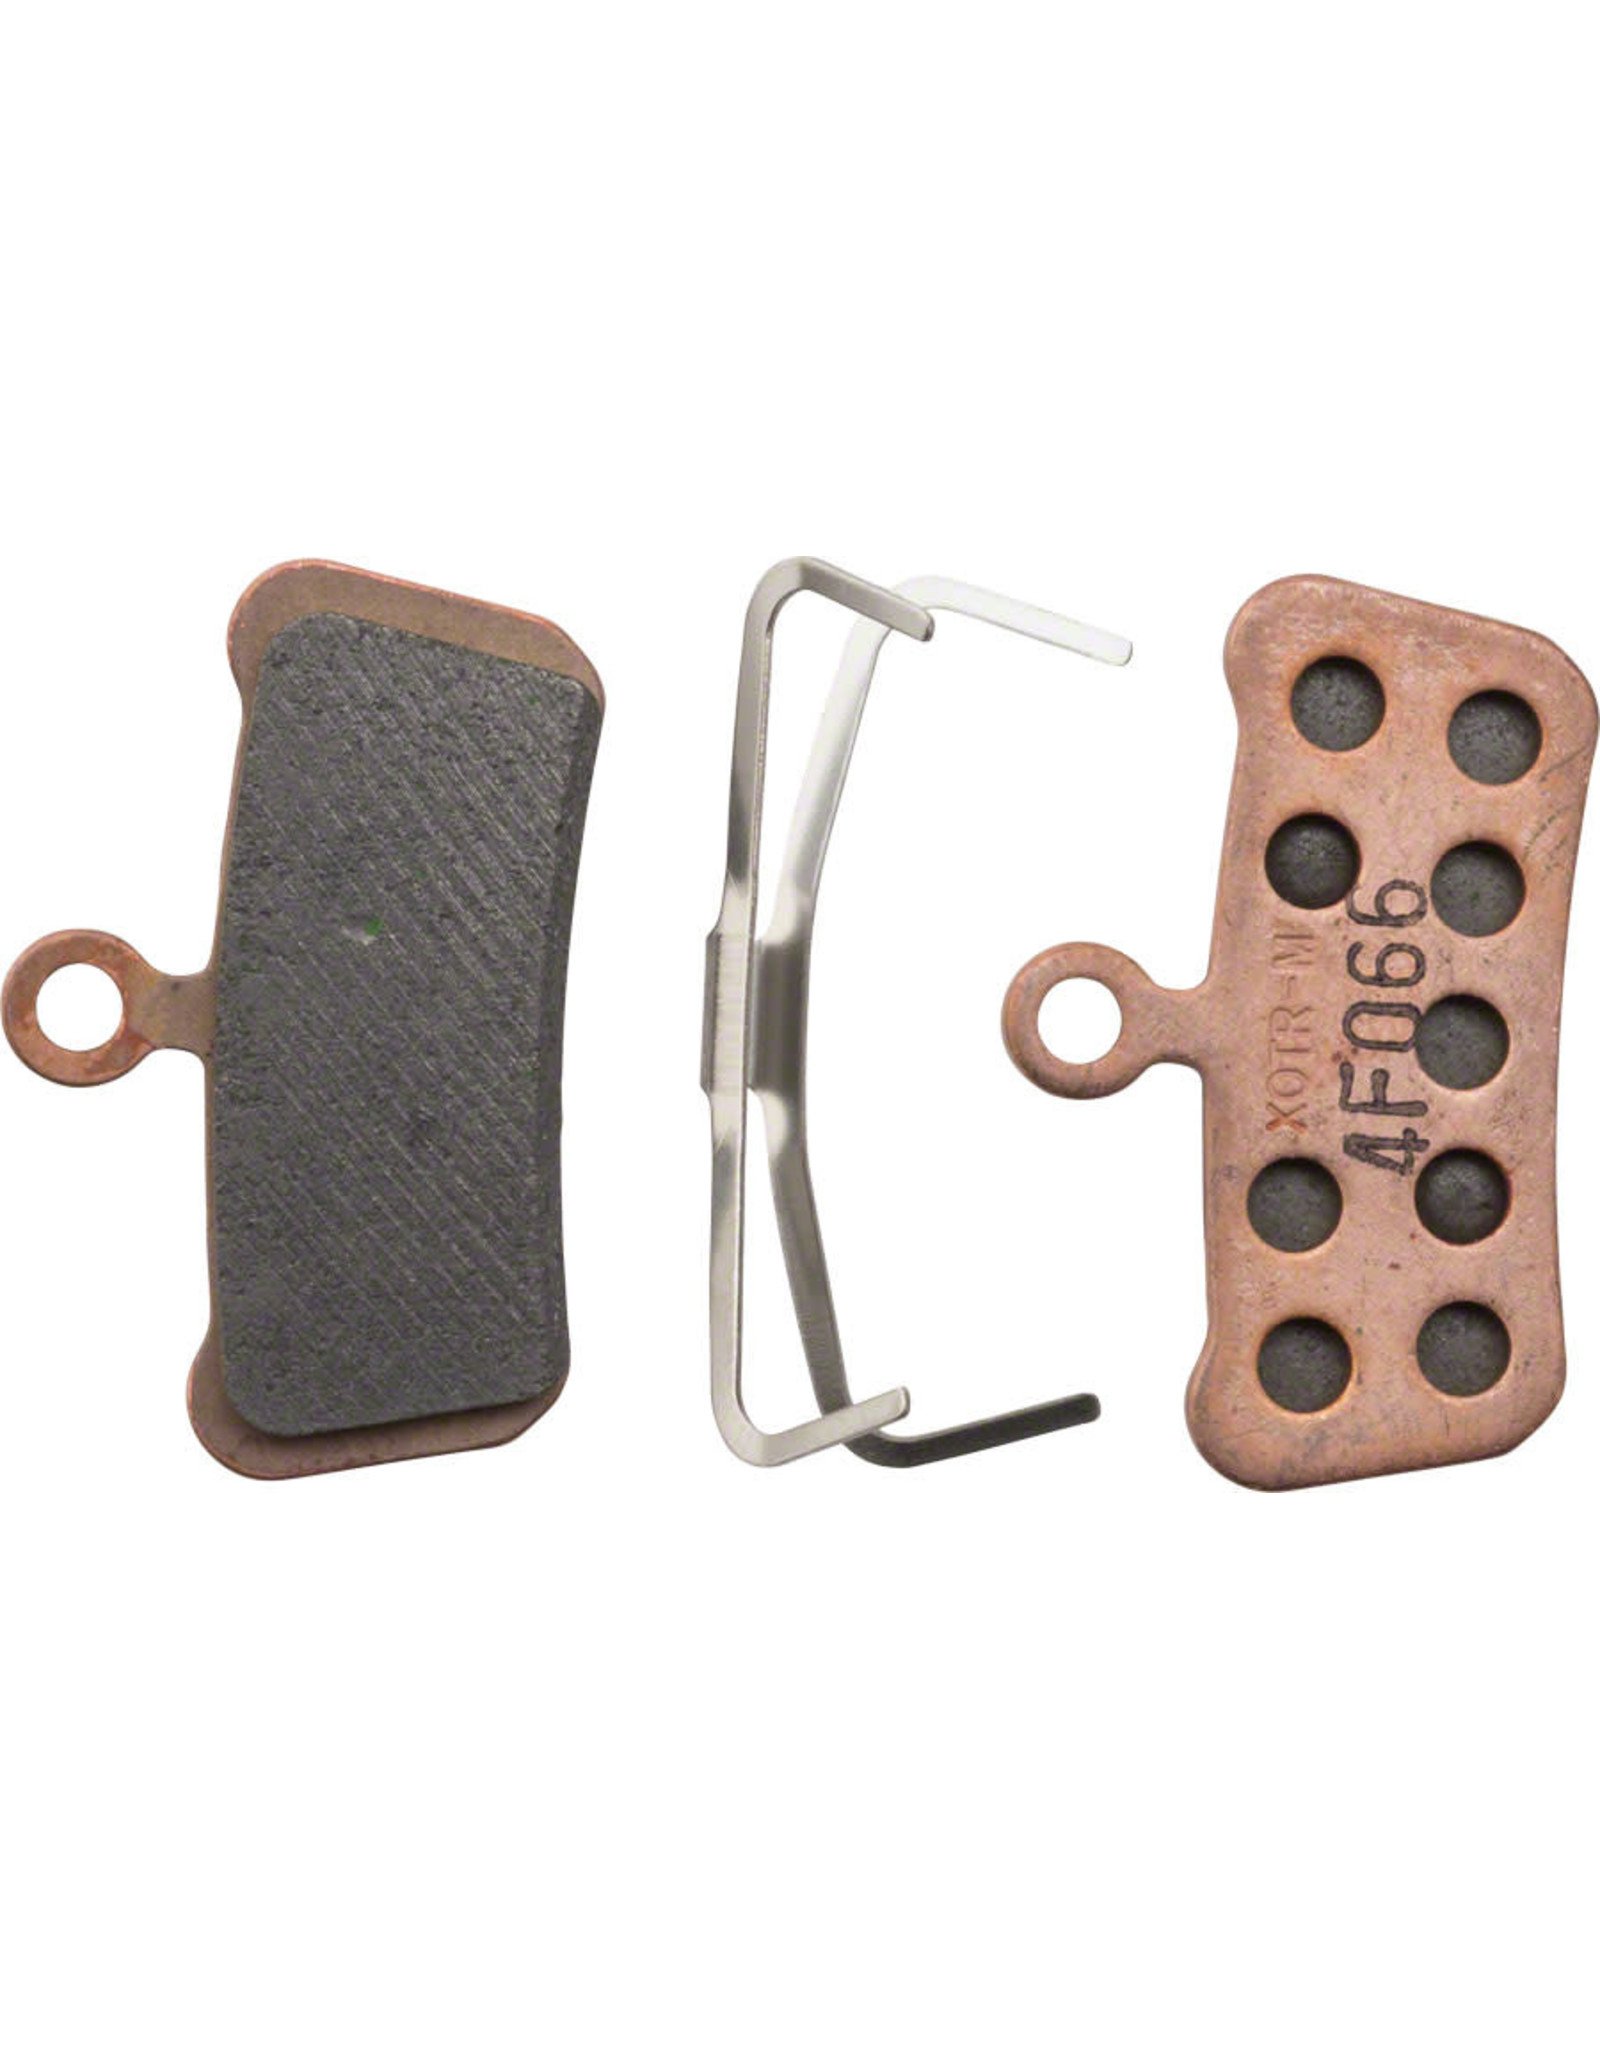 SRAM SRAM Disc Brake Pads - Sintered Compound, Steel Backed, Powerful, For Trail, Guide, and G2